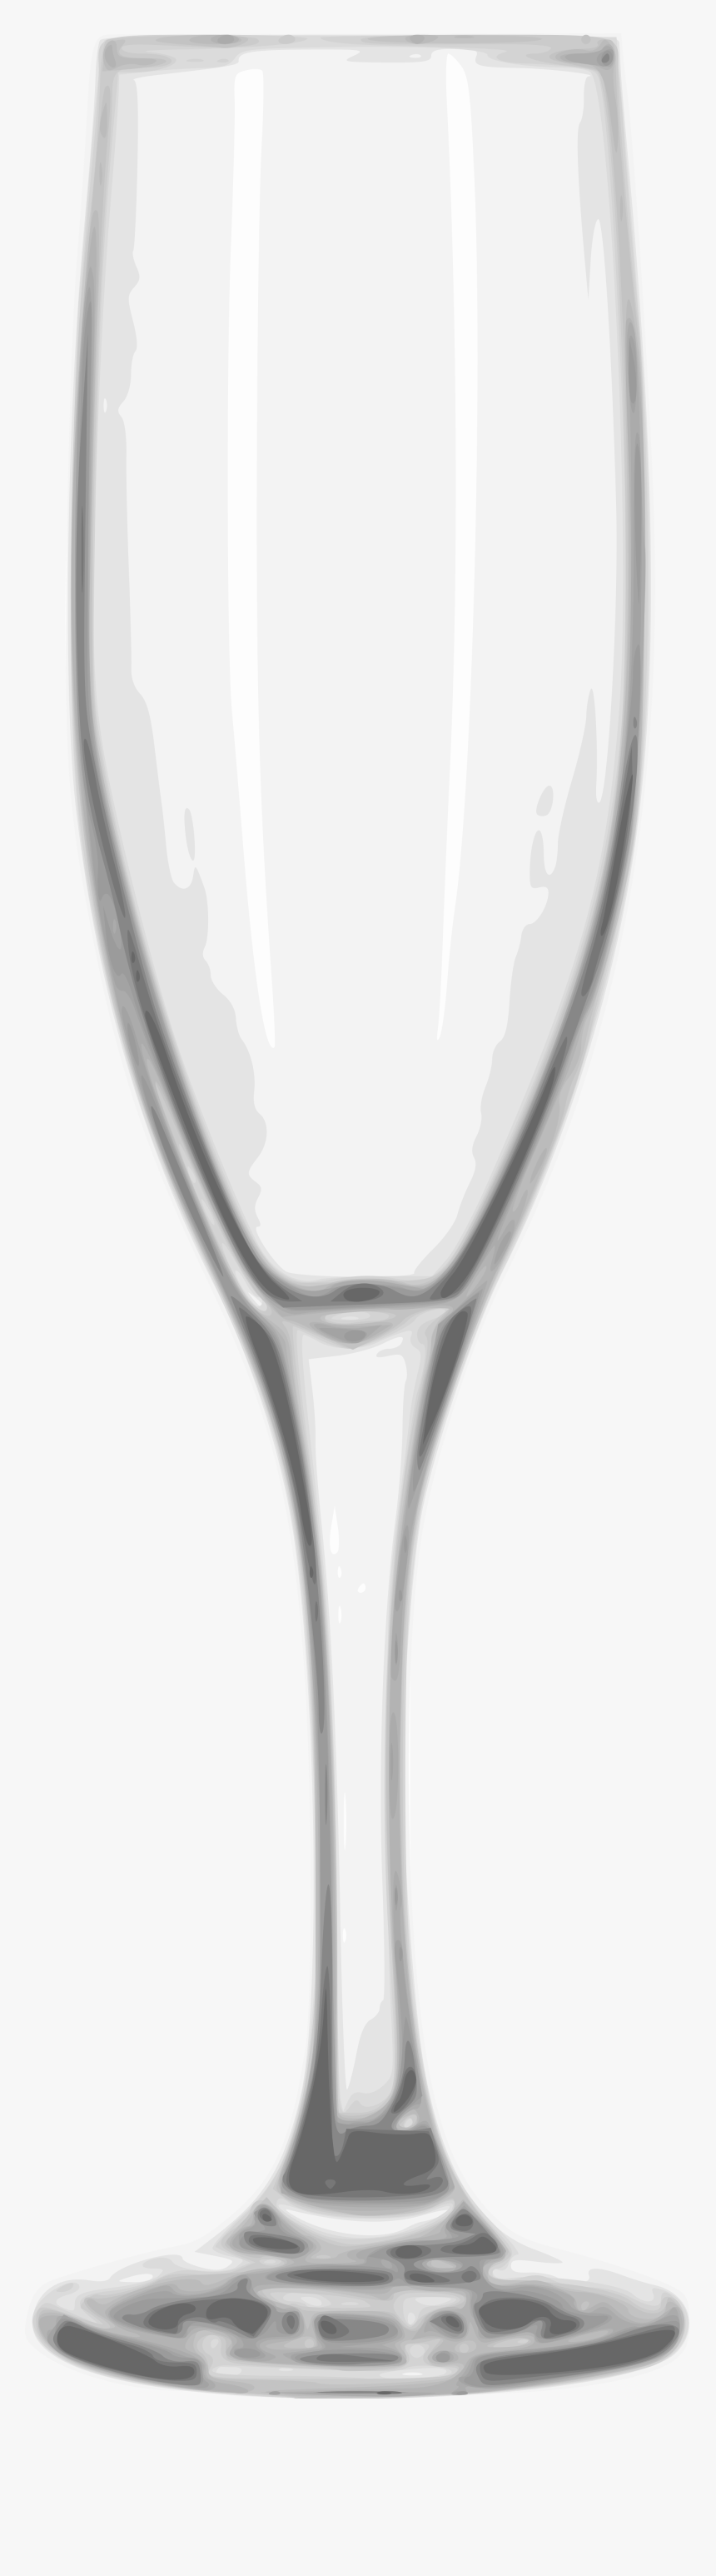 Champagne Flute Png - Champagne Flute Glass Png, Transparent Png, Free Download